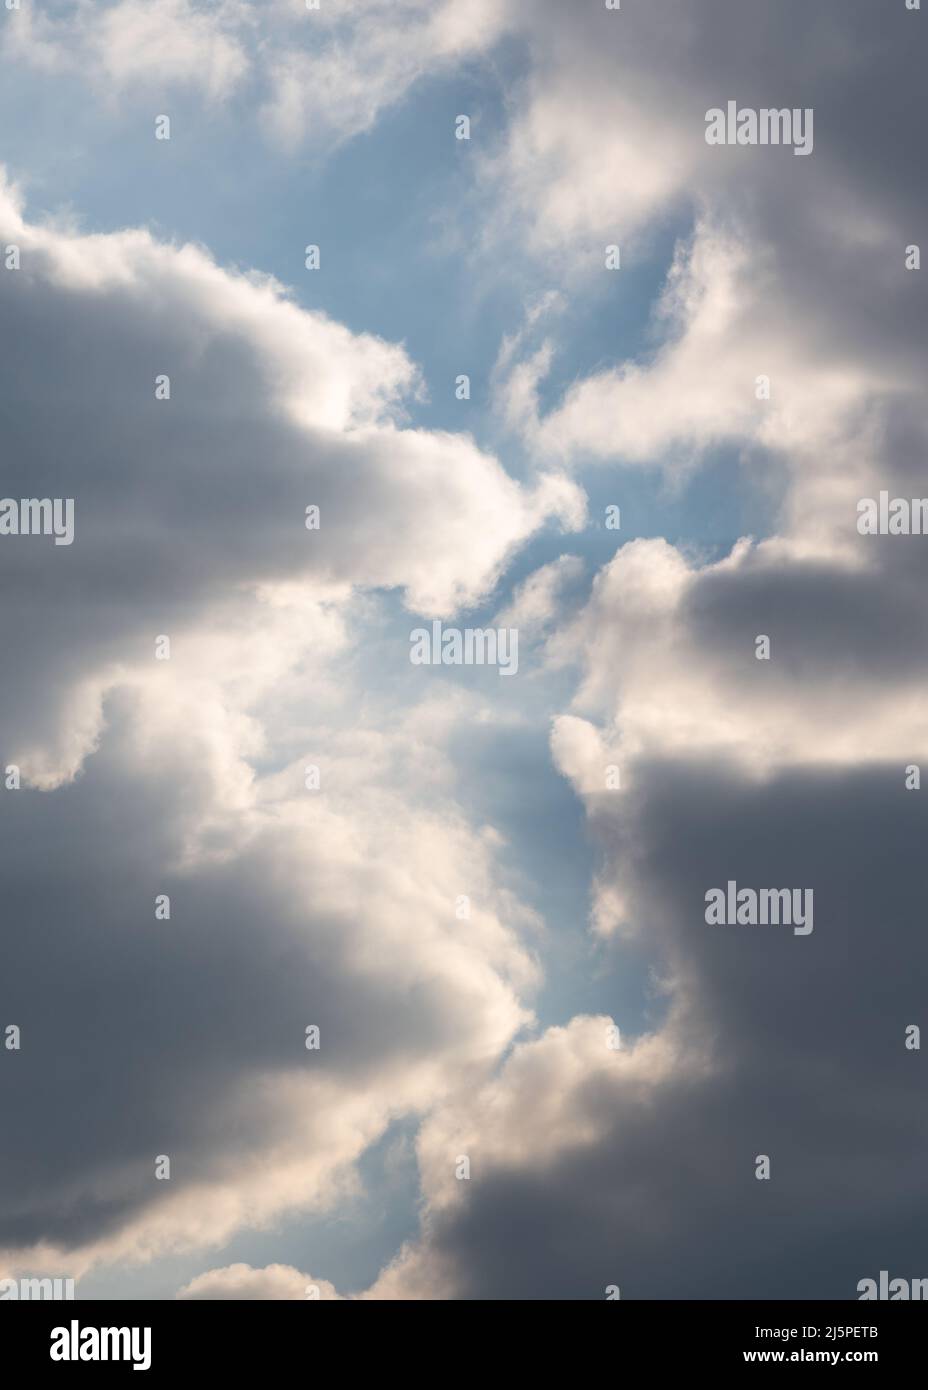 Two clouds with gap in between, concept of freedom and spirituality Stock Photo